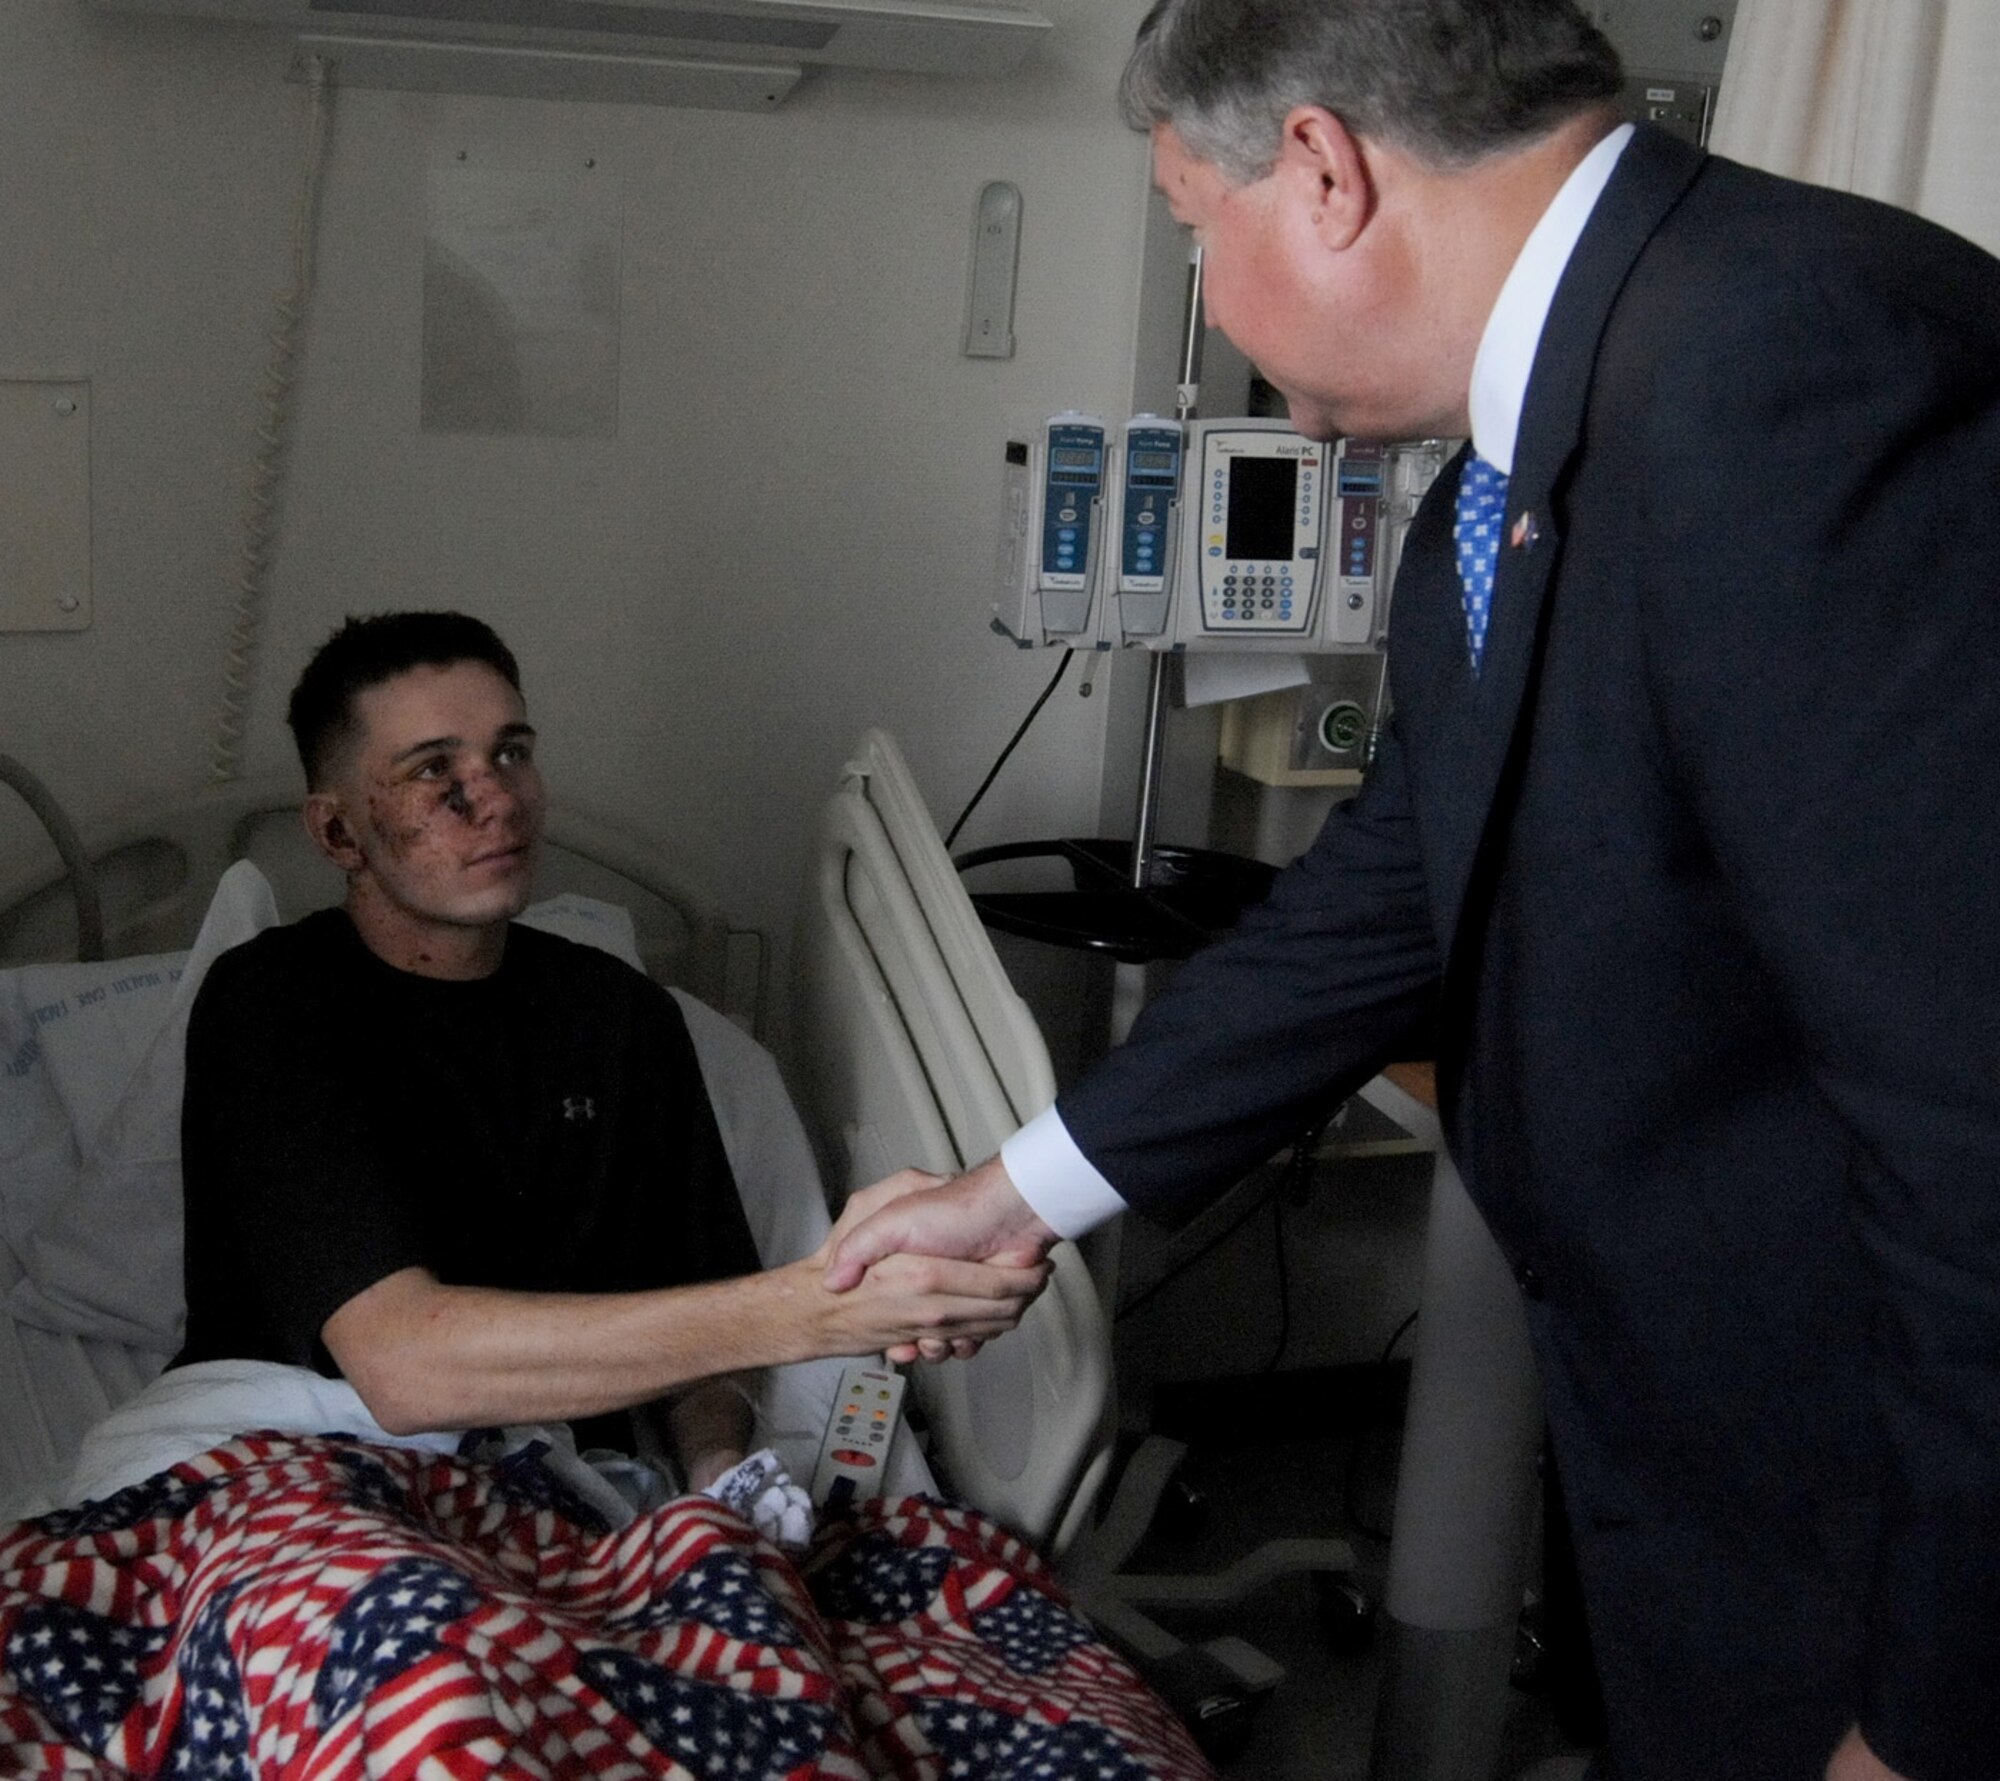 Secretary of the Air Force Michael Donley visits Marine Lance Cpl. Jeremiah Rardin June 18, 2011, at Landstuhl Regional Medical Center, Germany. Lance Corporal Rardin is being treated for injuries sustained while deployed to Afghanistan. (U.S. Army photo/Chuck Roberts)